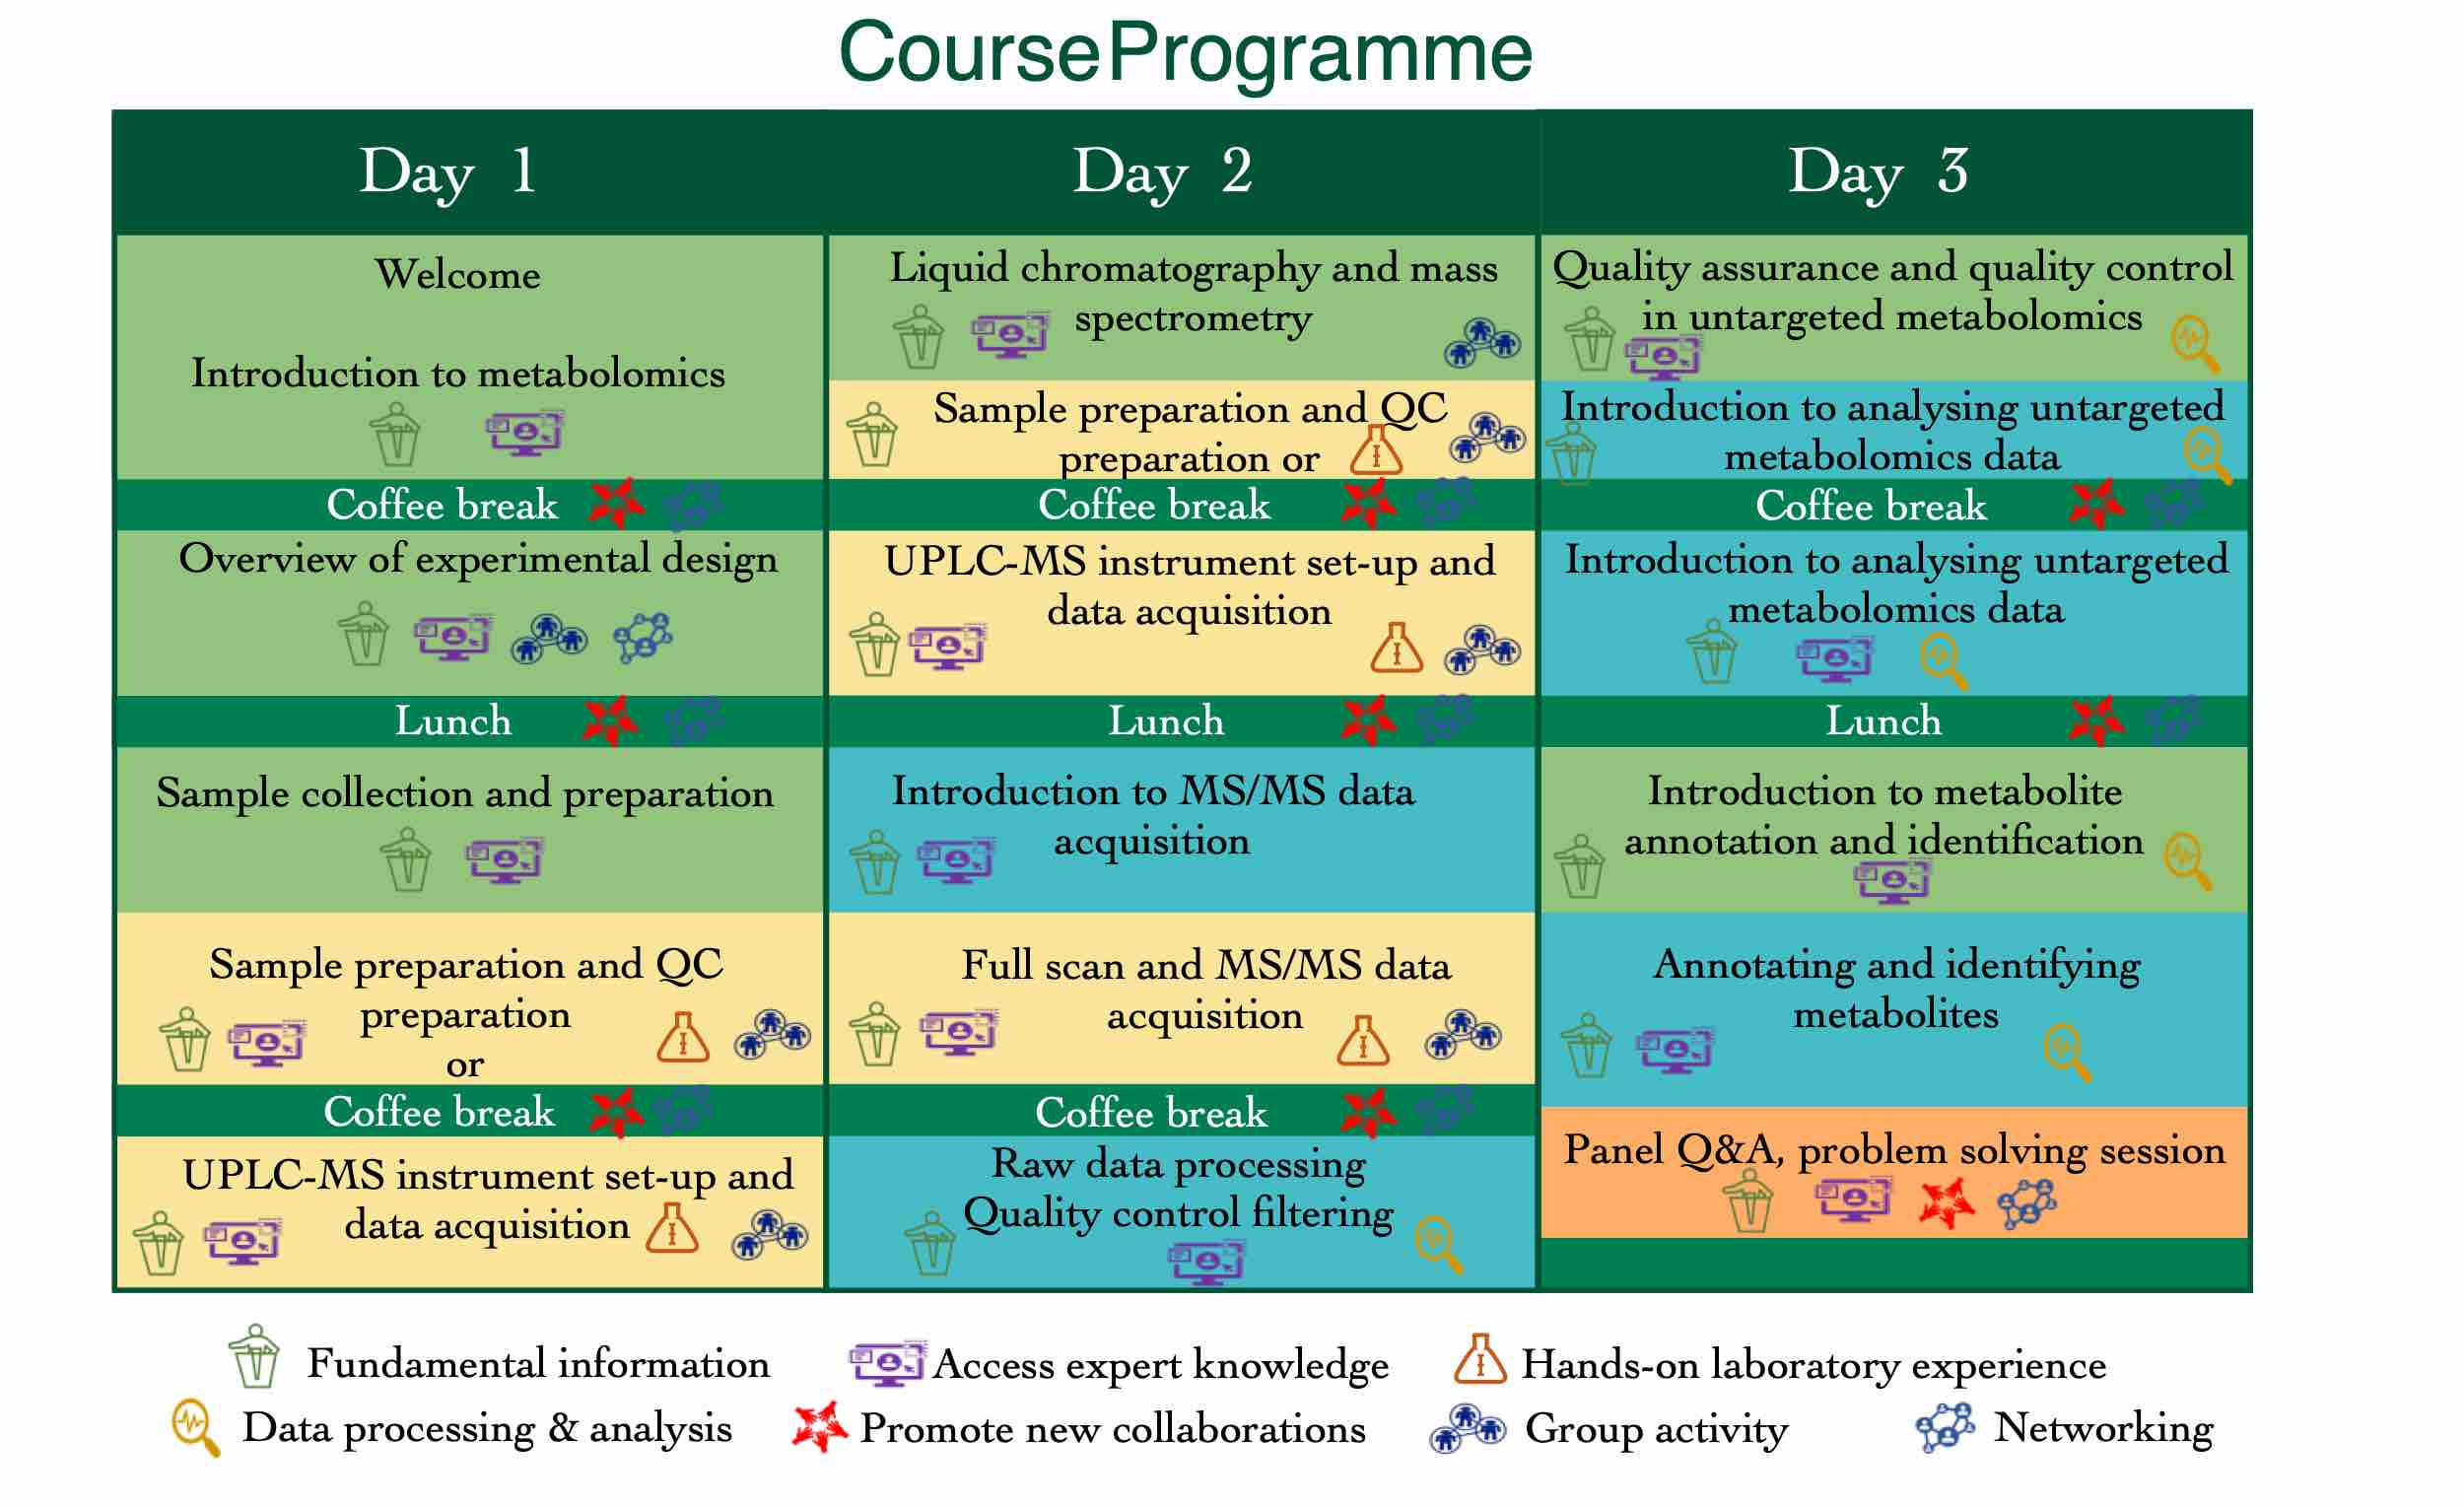 Schedule outlining course programme and activities